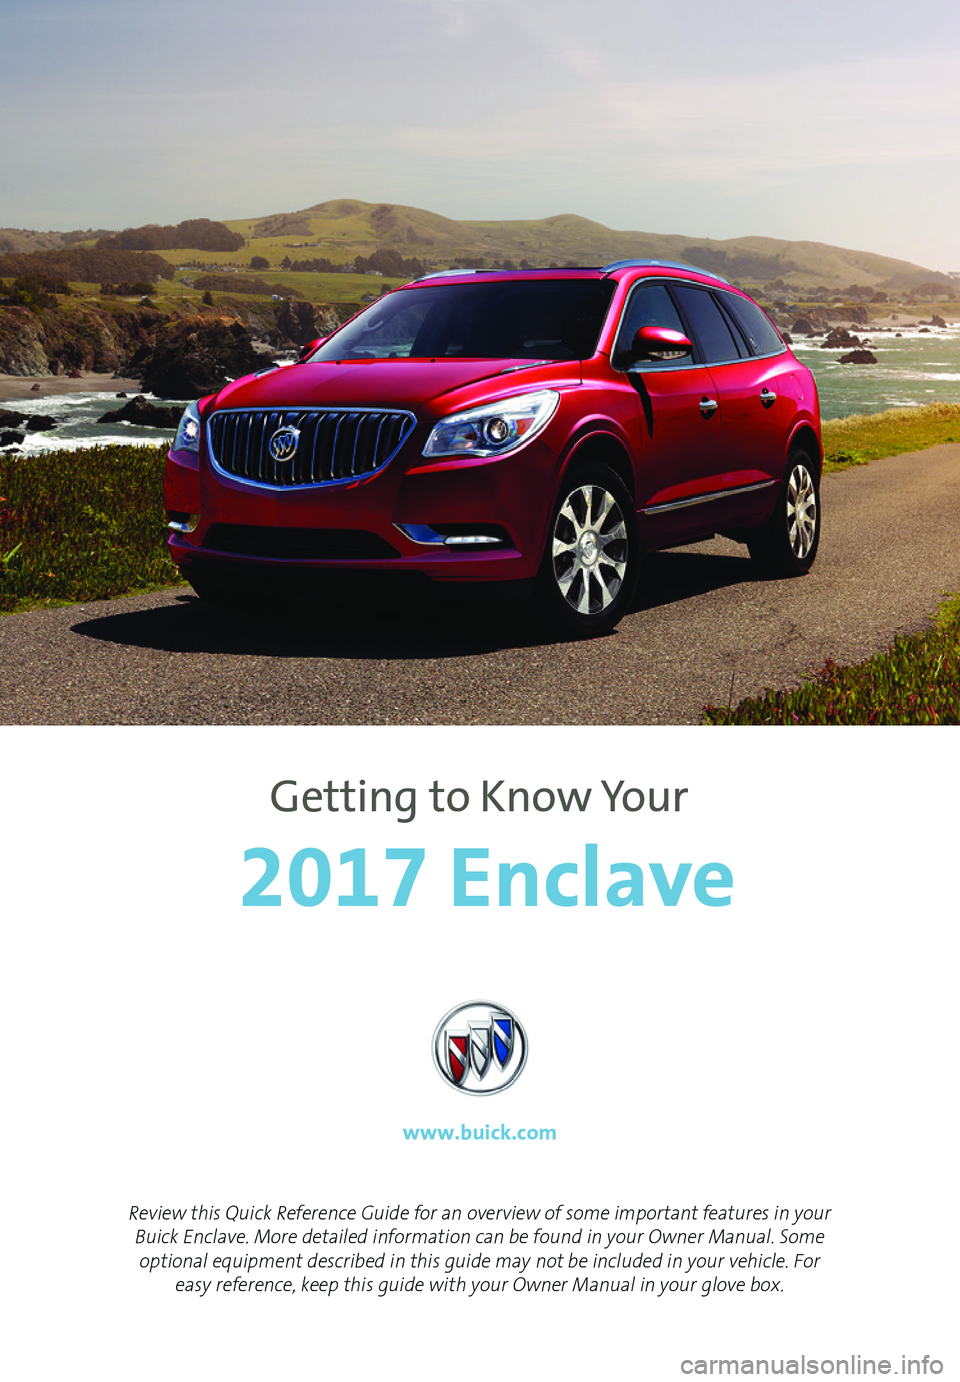 BUICK ENCLAVE 2017  Get To Know Guide 1
Review this Quick Reference Guide for an overview of some important features in your Buick Enclave. More detailed information can be found in your Owner Manual. Some optional equipment described in 